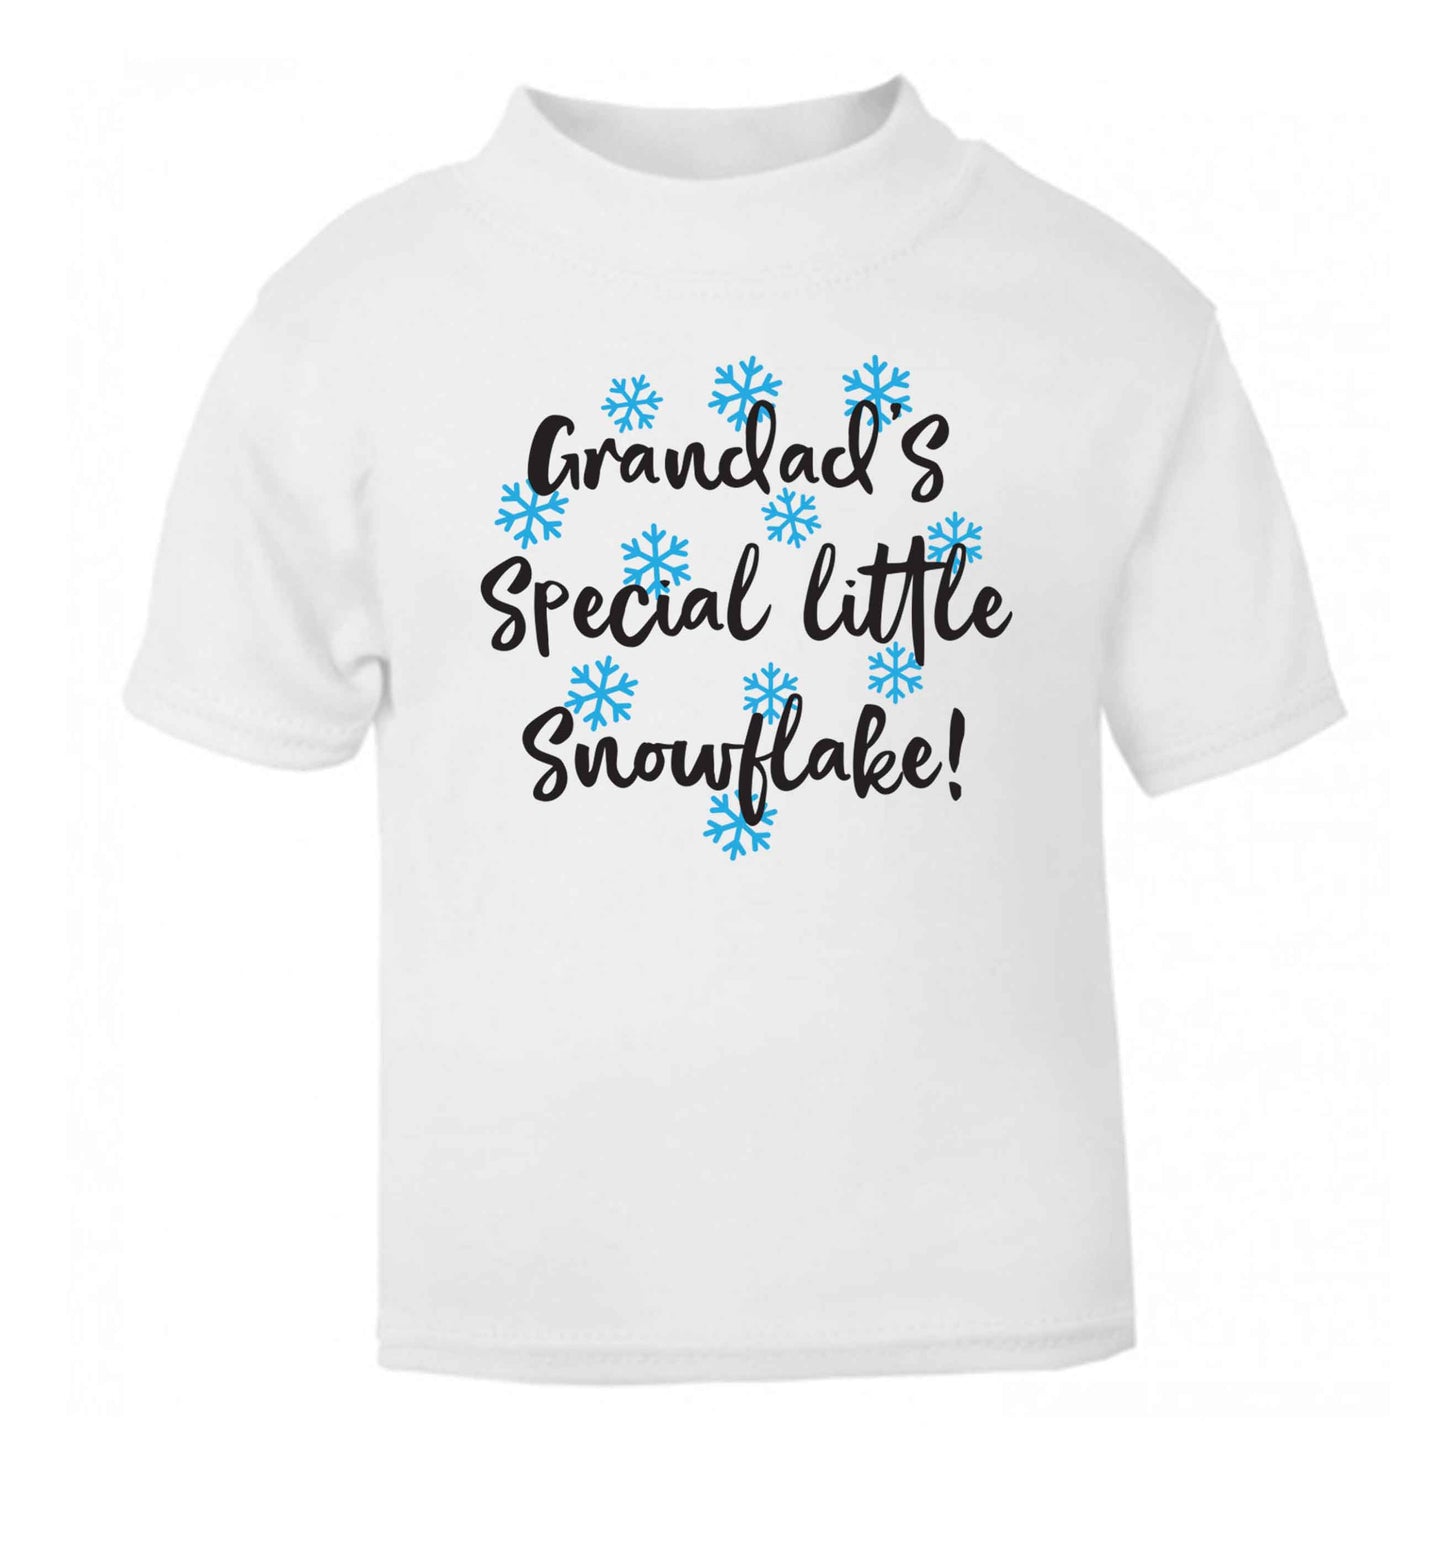 Grandad's special little snowflake white Baby Toddler Tshirt 2 Years